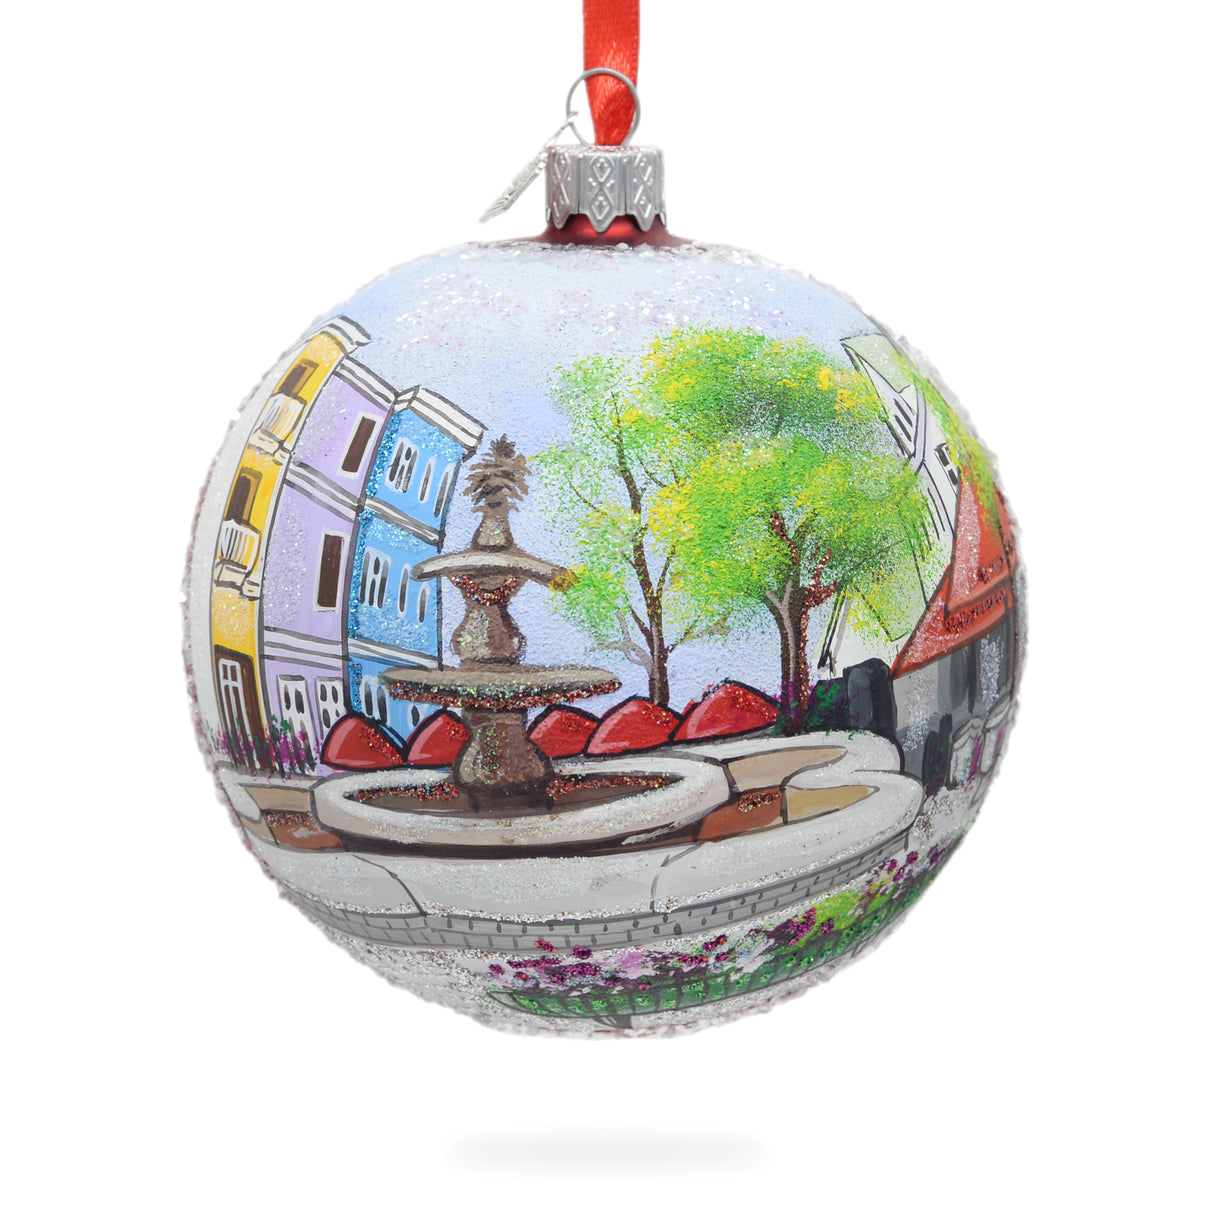 Historic Federal Hill, Providence, Rhode Island, USA Glass Ball Christmas Ornament 4 Inches in Multi color, Round shape